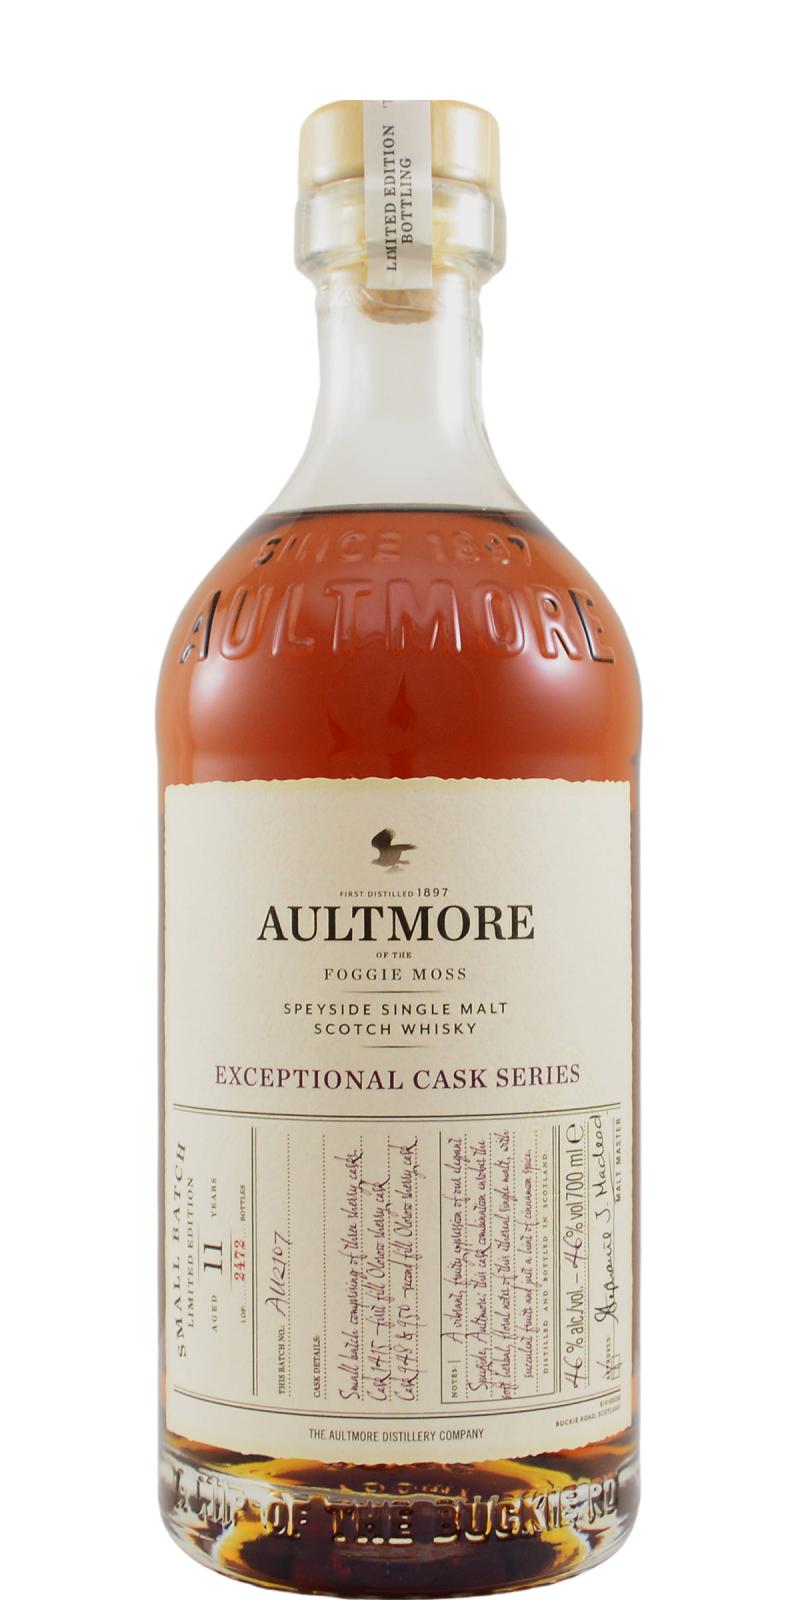 Aultmore 11-year-old